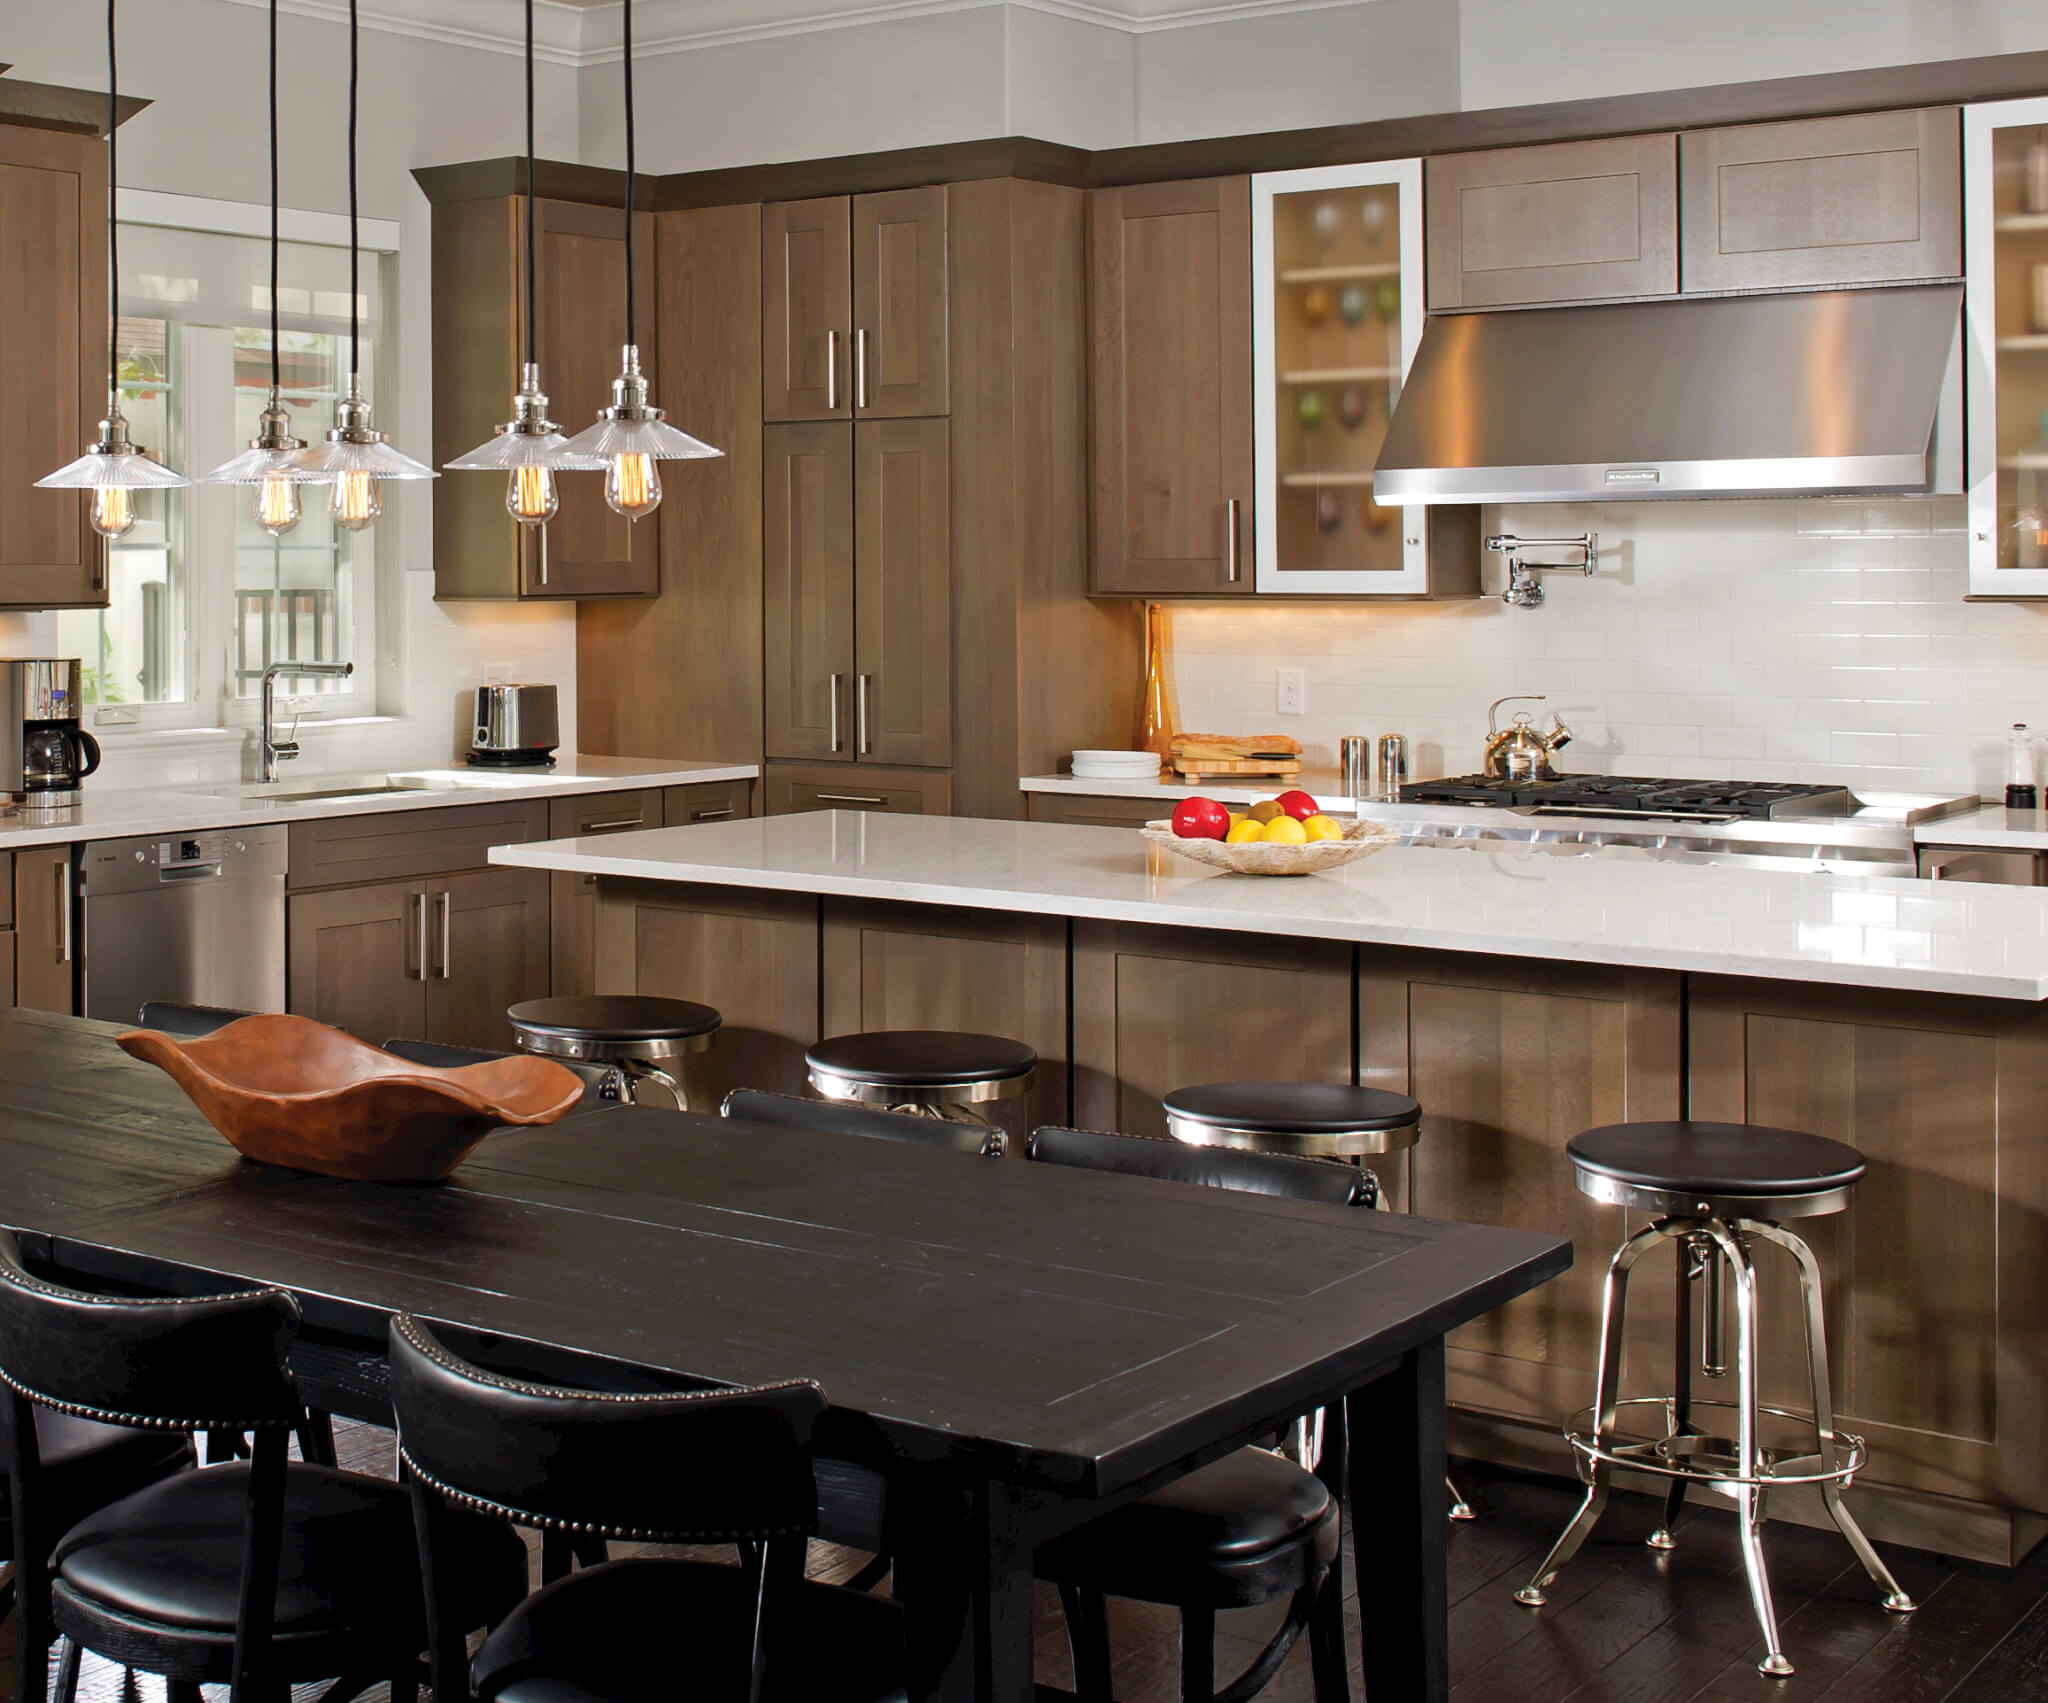 A kitchen with warm brown woods featuring Kabinart custom cabinets